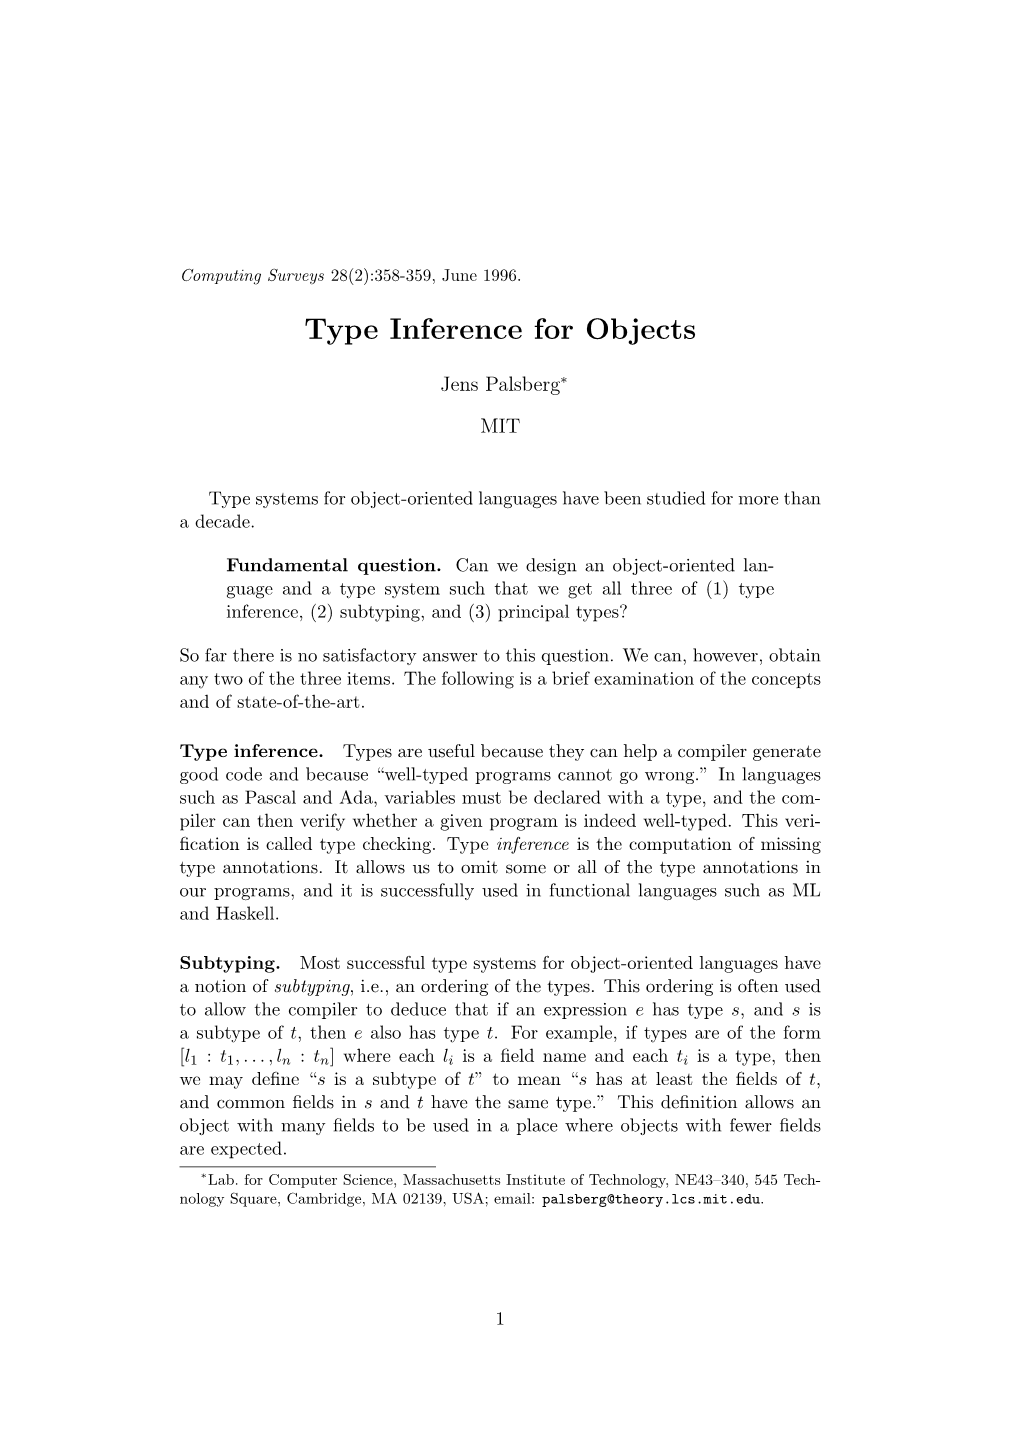 Type Inference for Objects